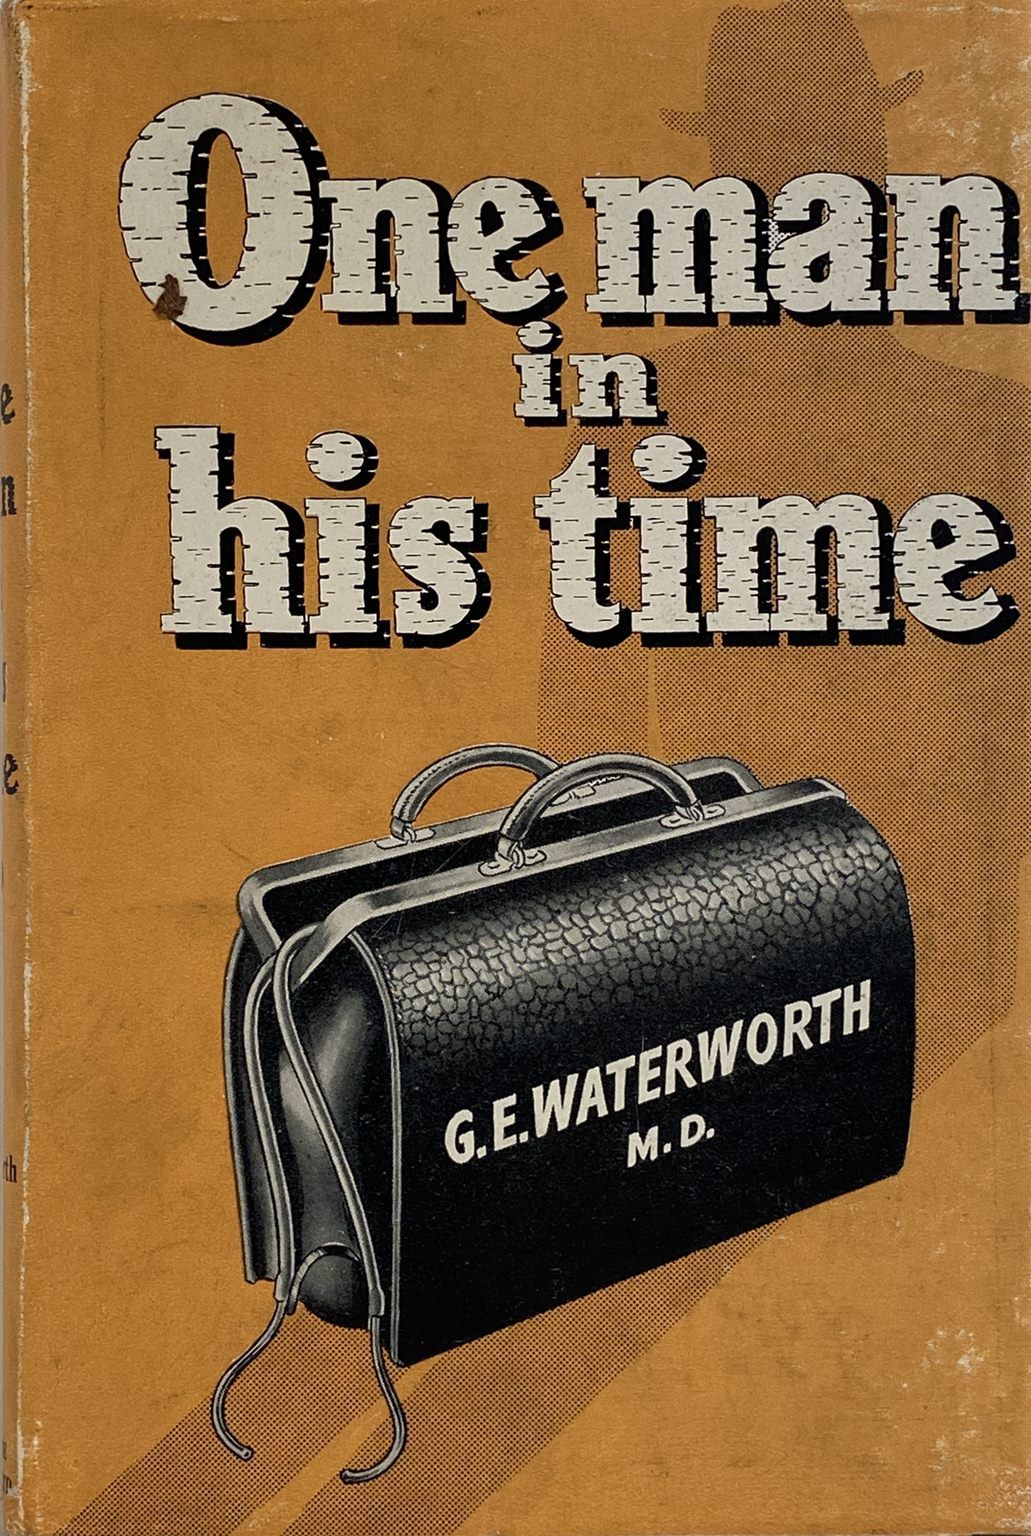 ONE MAN IN HIS TIME: Adventures in Medical Practice